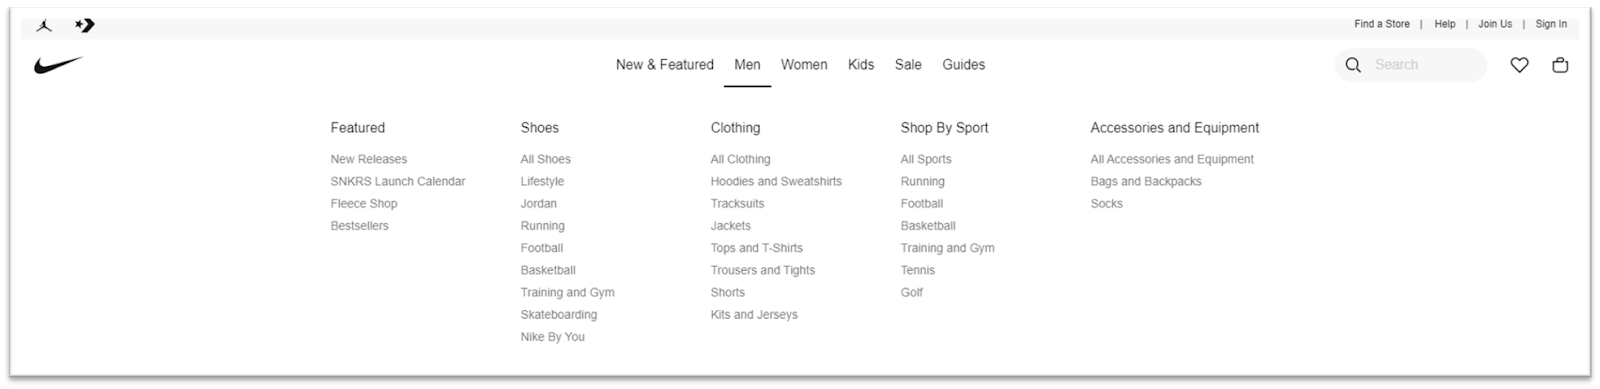 Nike.com product category structure in PLP